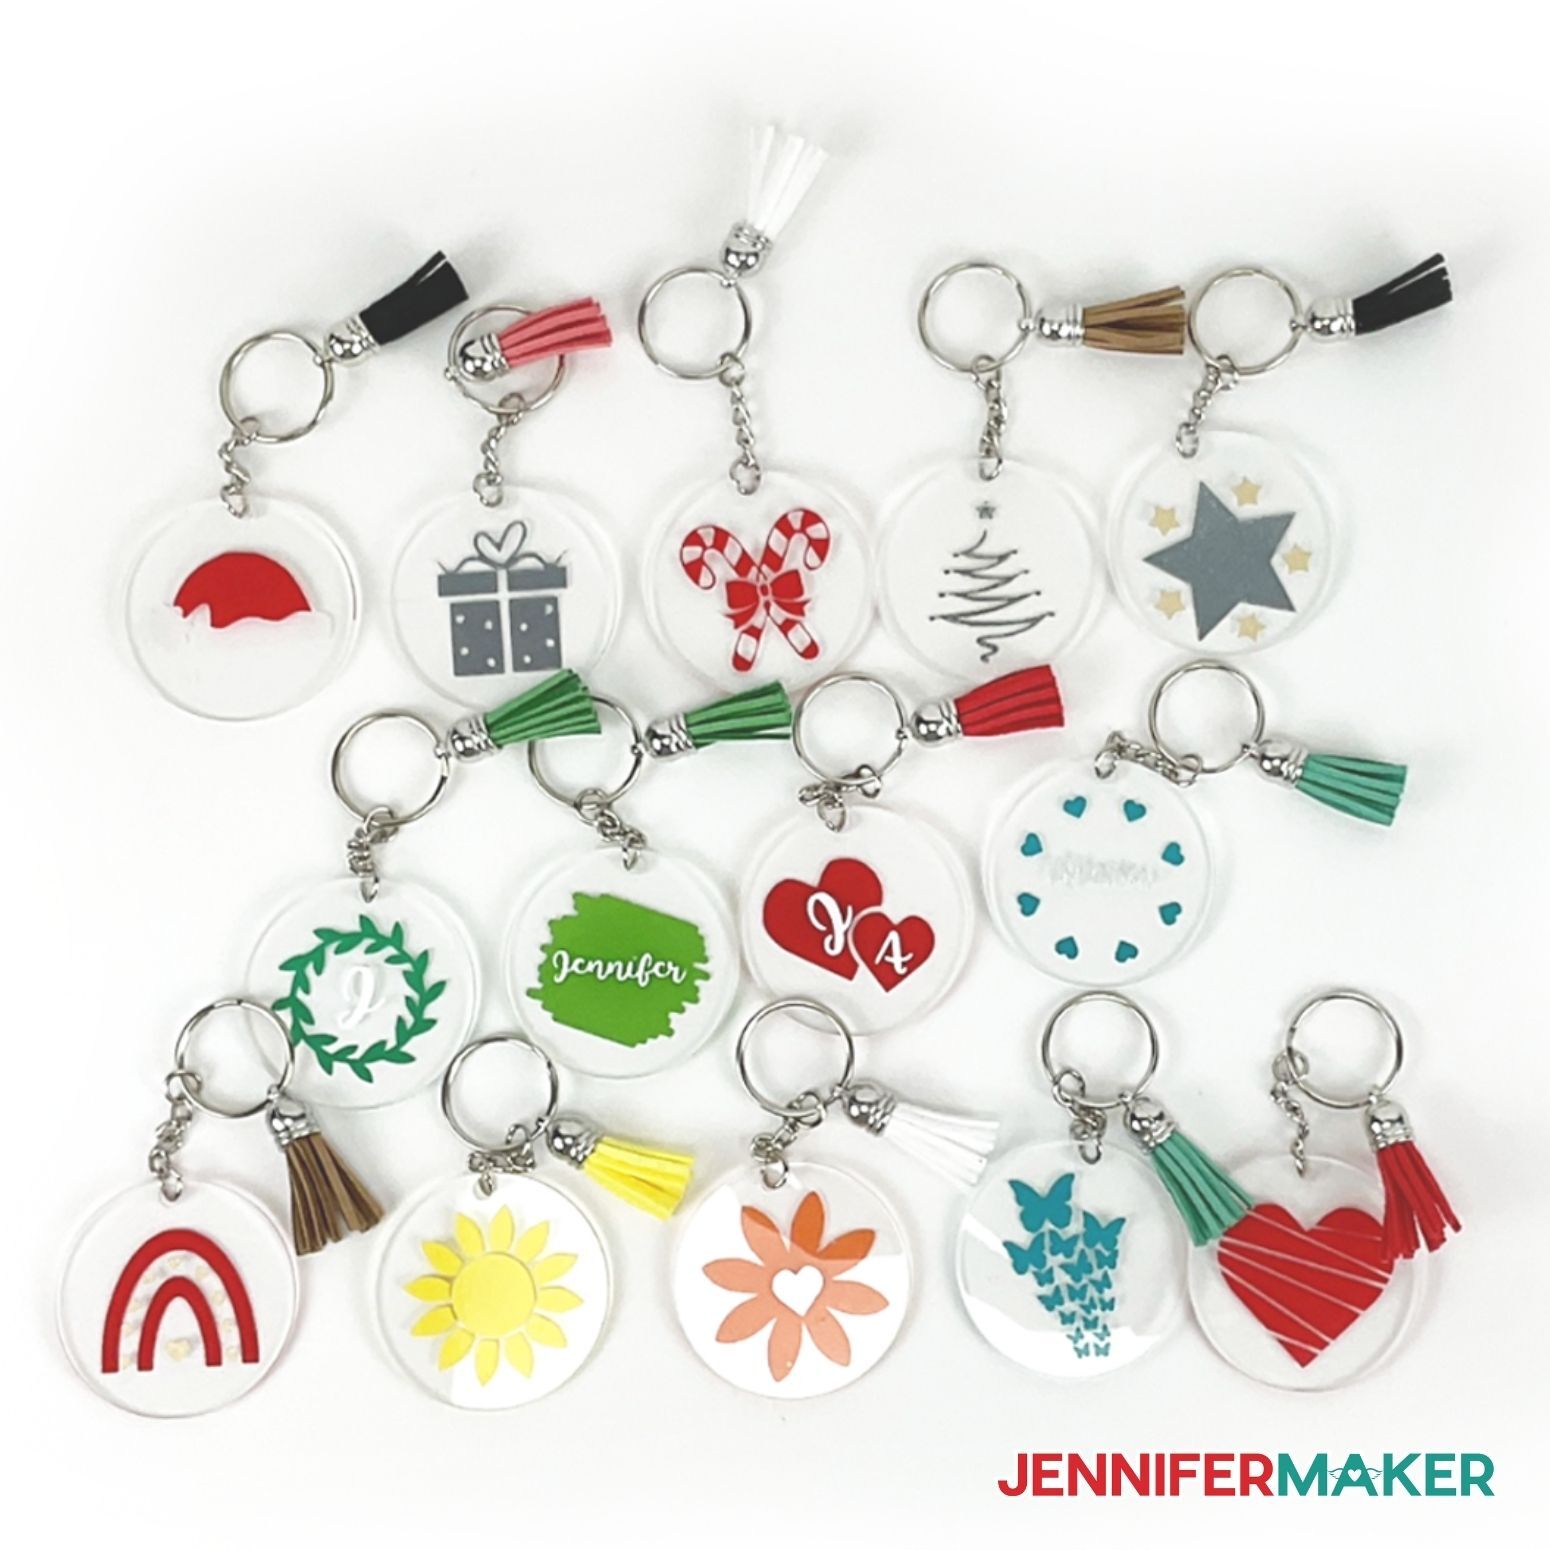 Key ring parts for making your own keychains